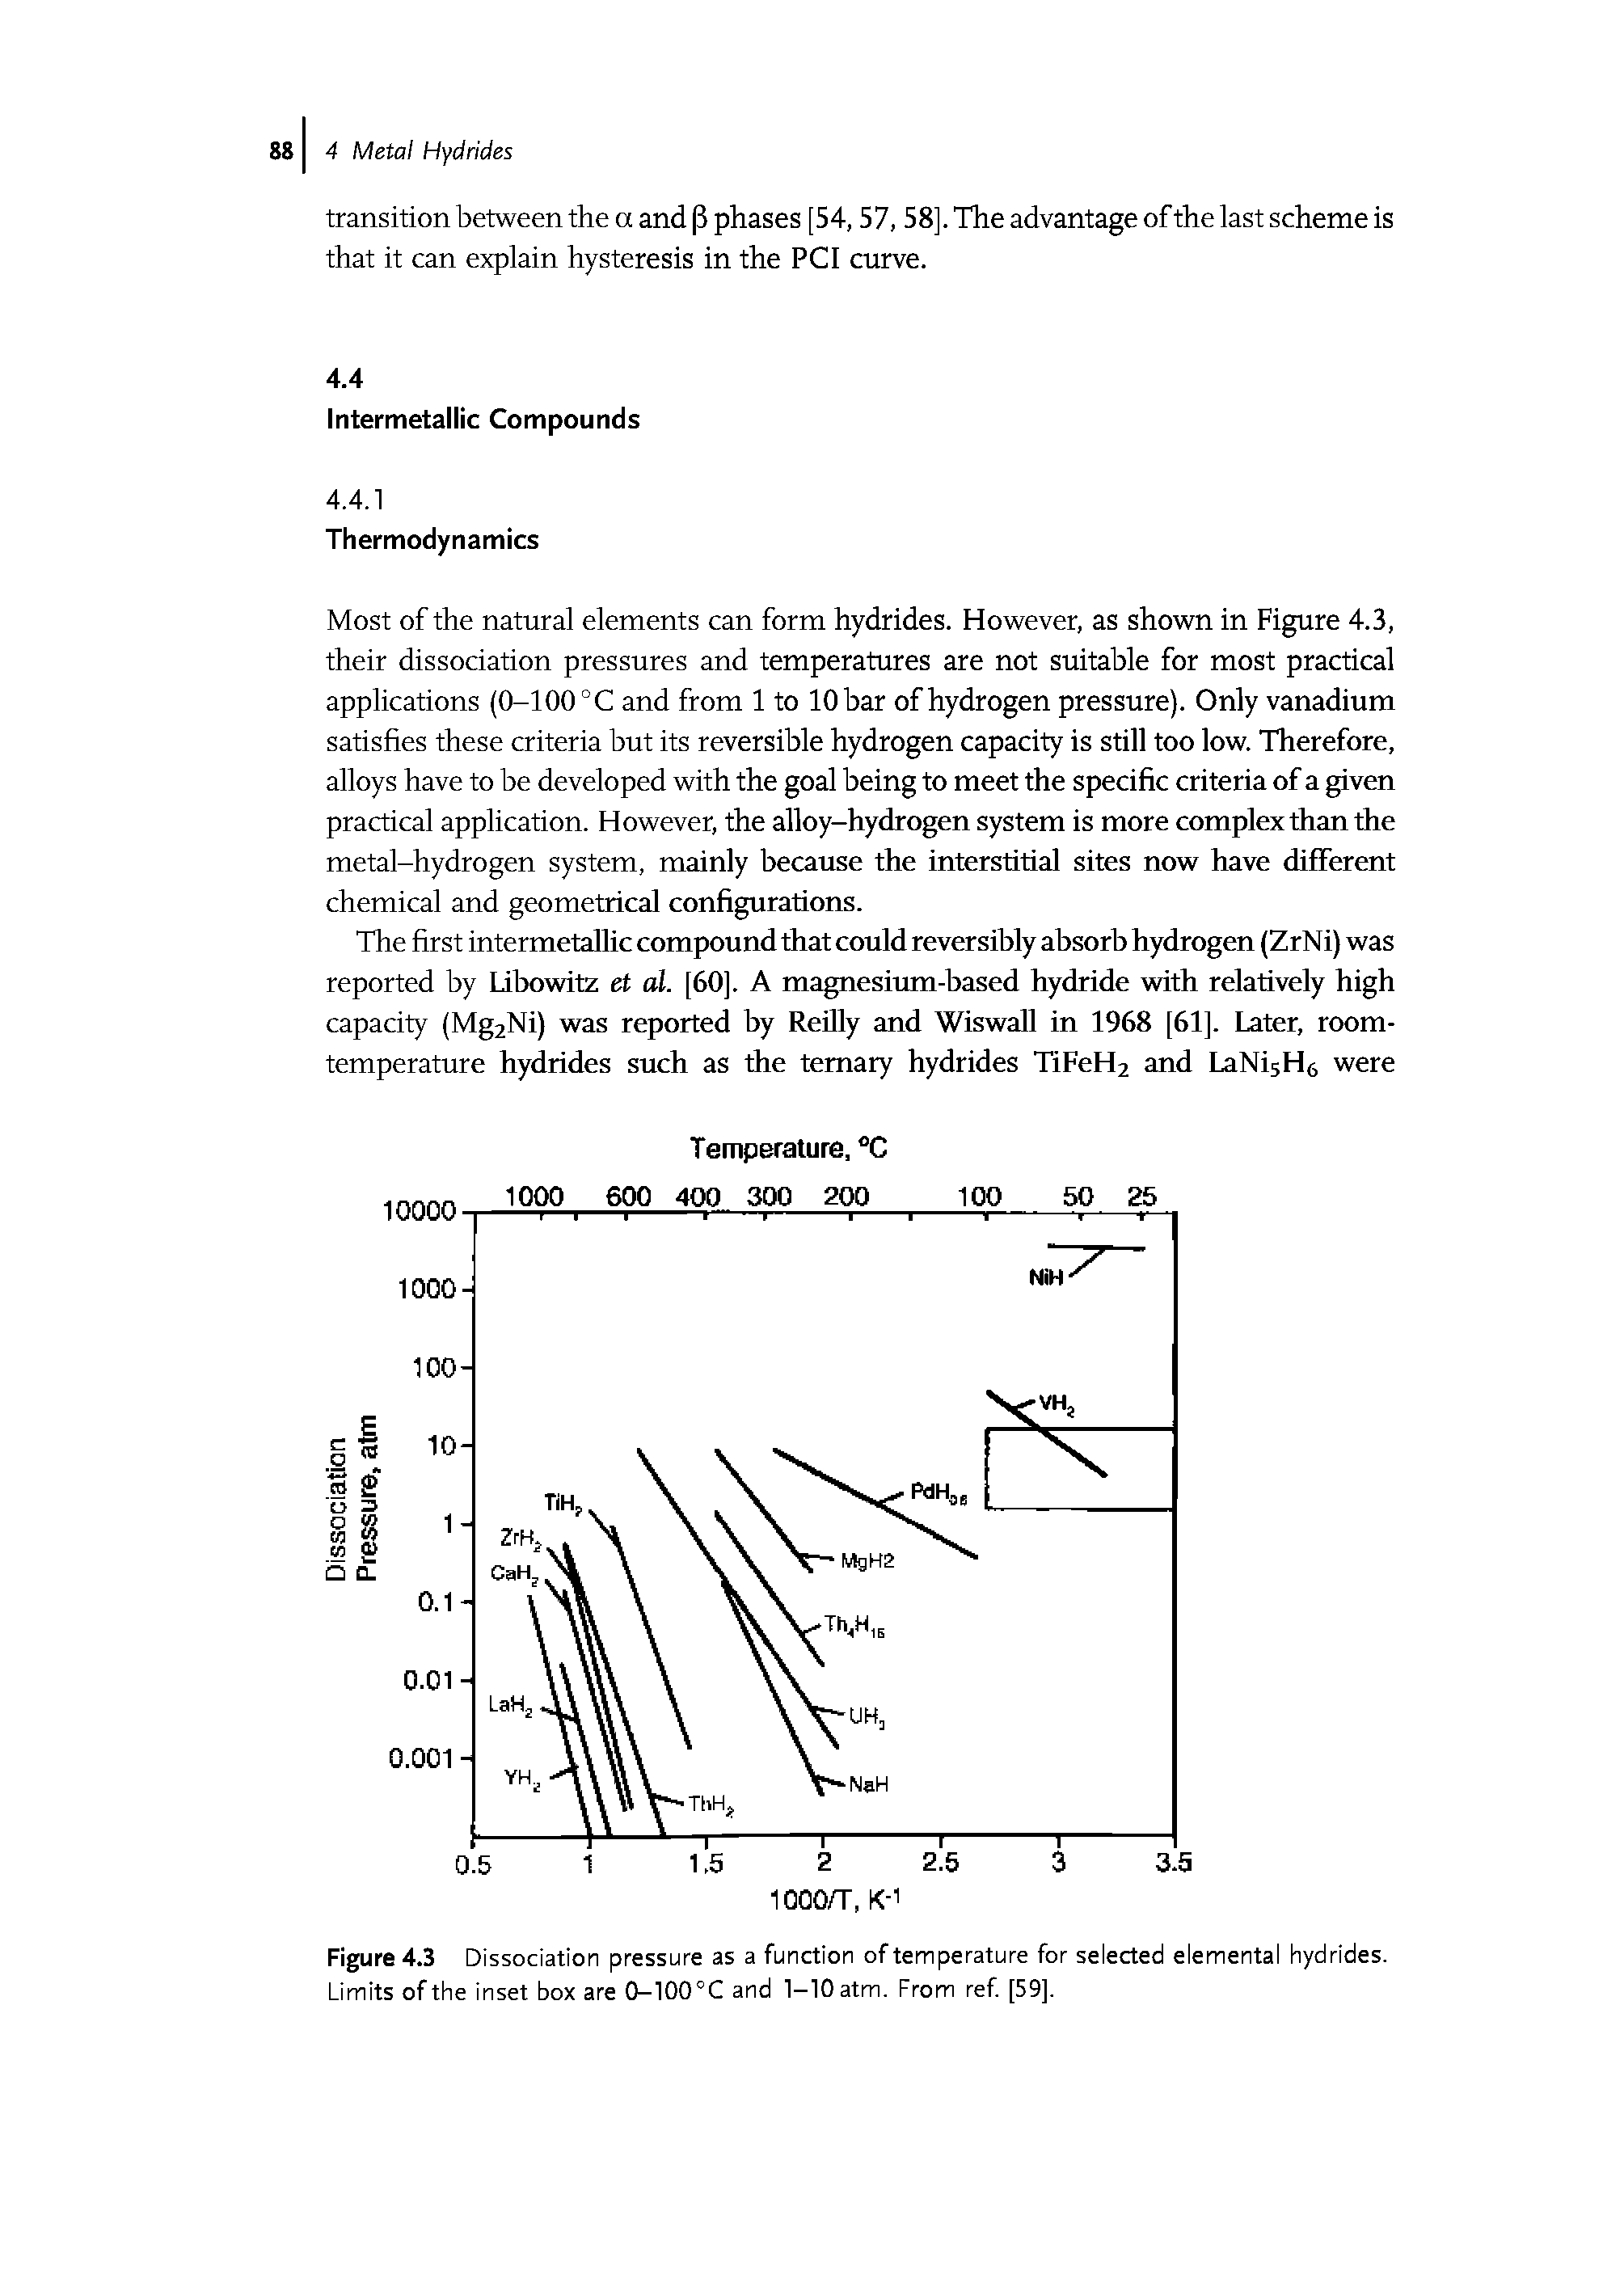 Figure 4.3 Dissociation pressure as a function of temperature for selected elemental hydrides. Limits of the inset box are 0-100°C and 1-10 atm. From ref [59],...